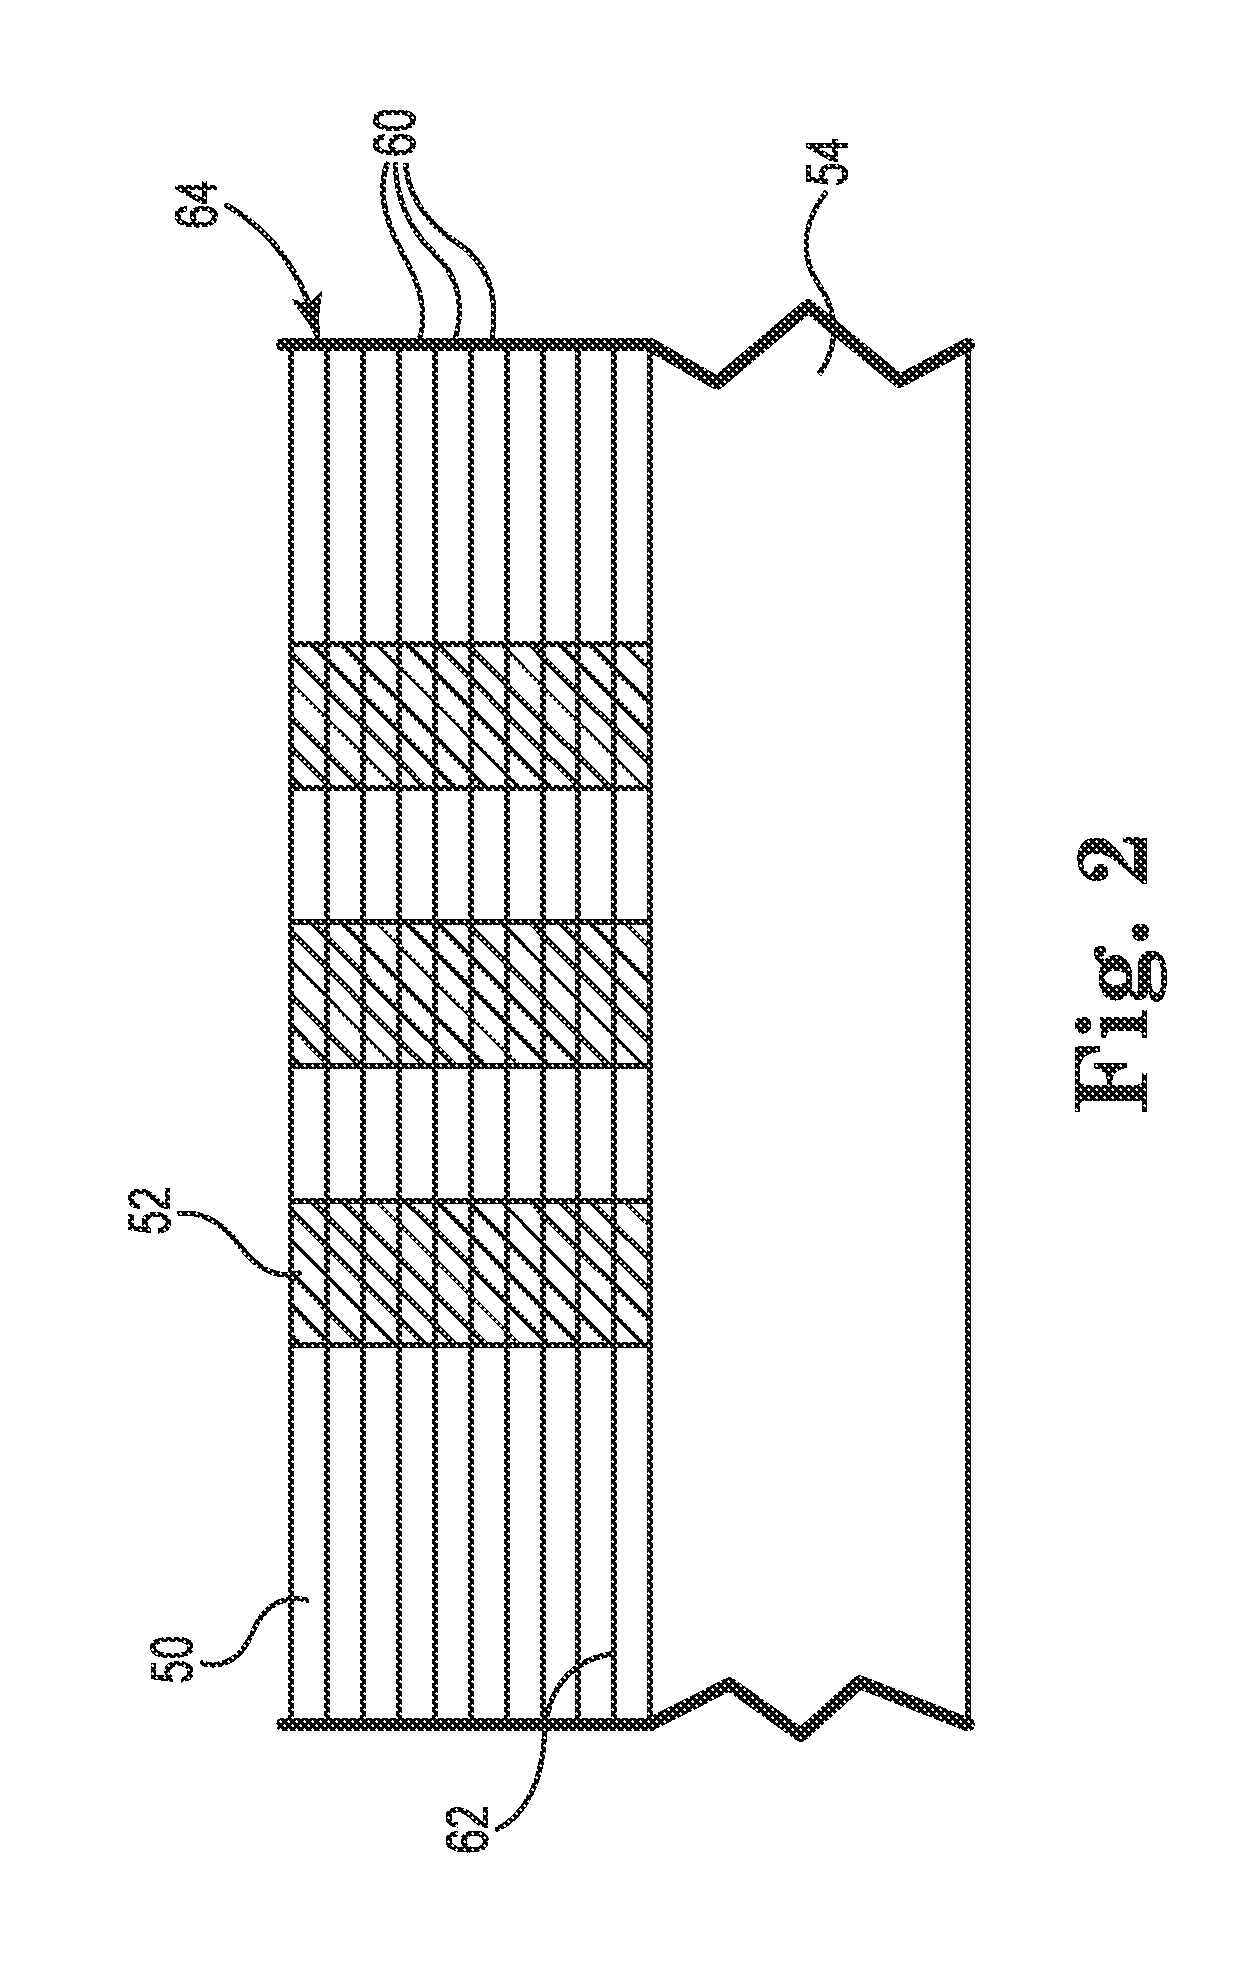 Electrical connector insulator housing